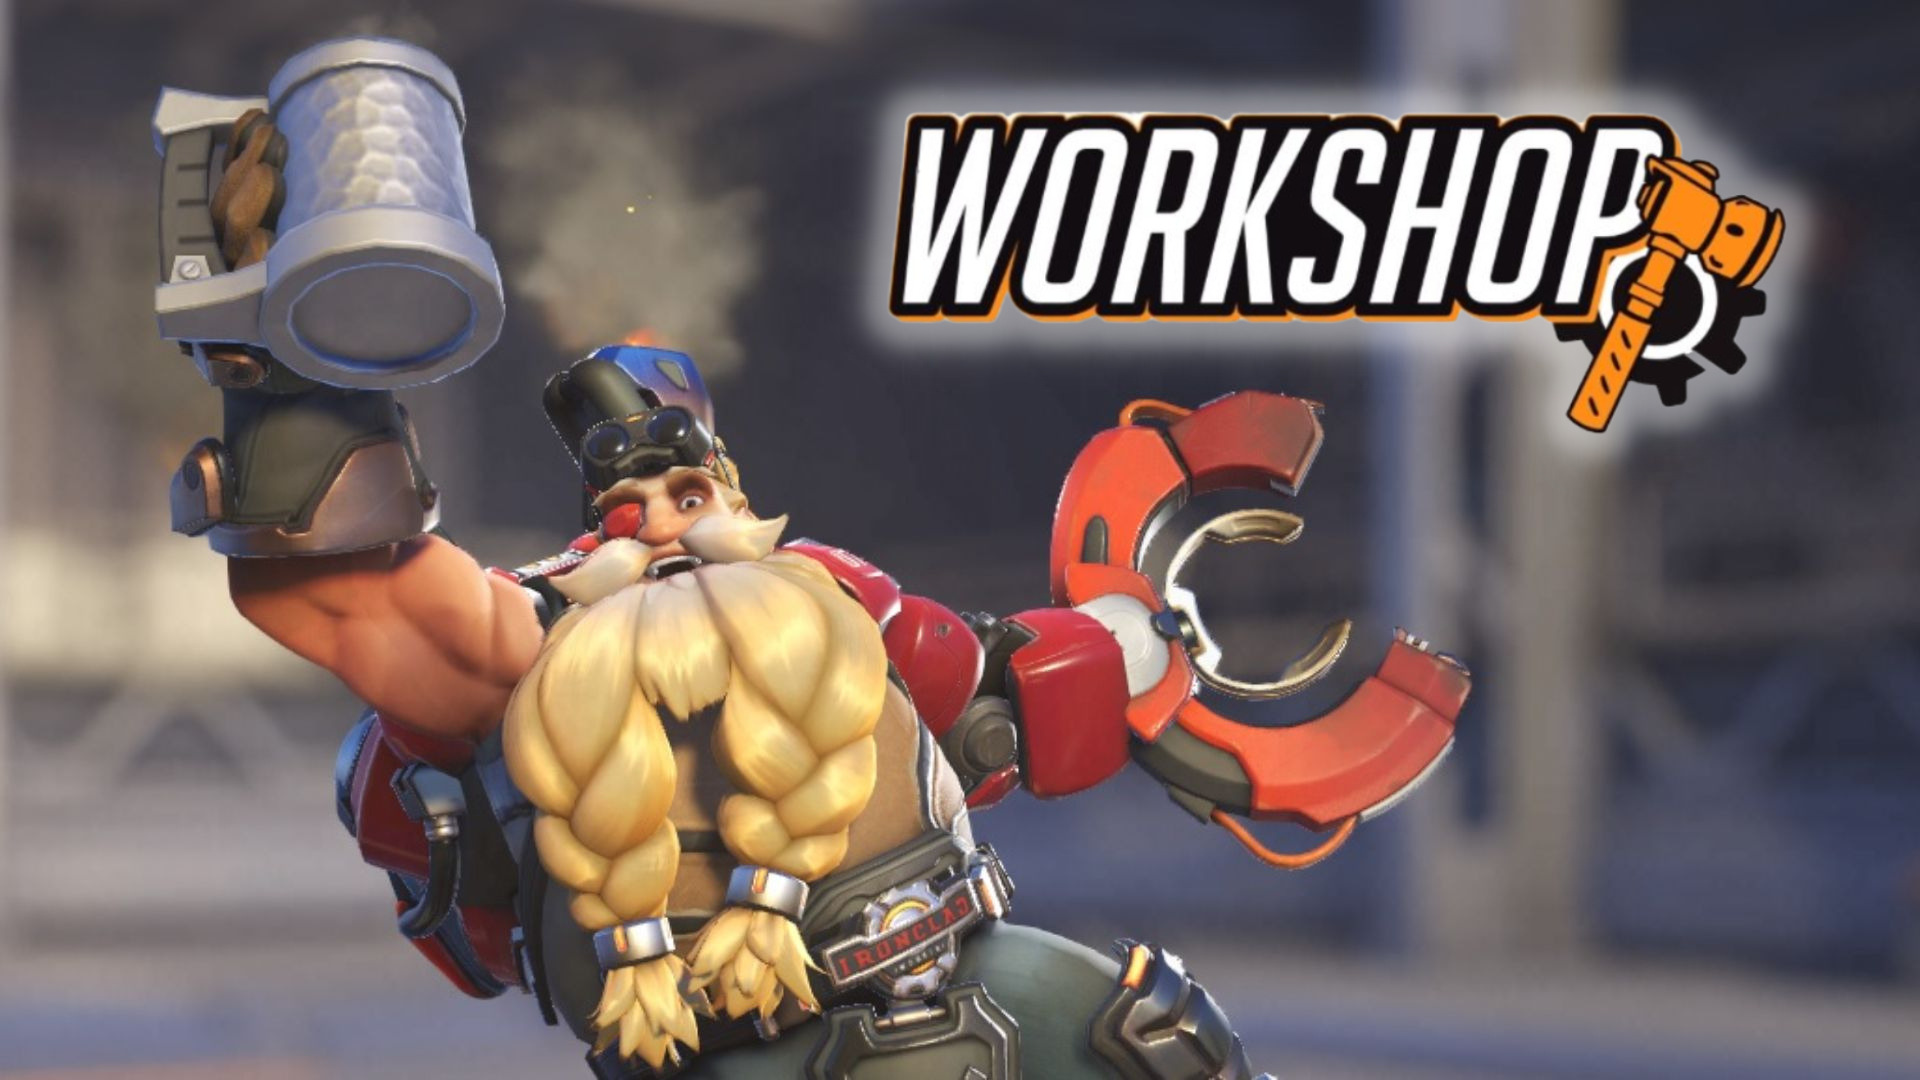 This *NEW* Aim Game is INSANE - Overwatch Aim Training Workshop